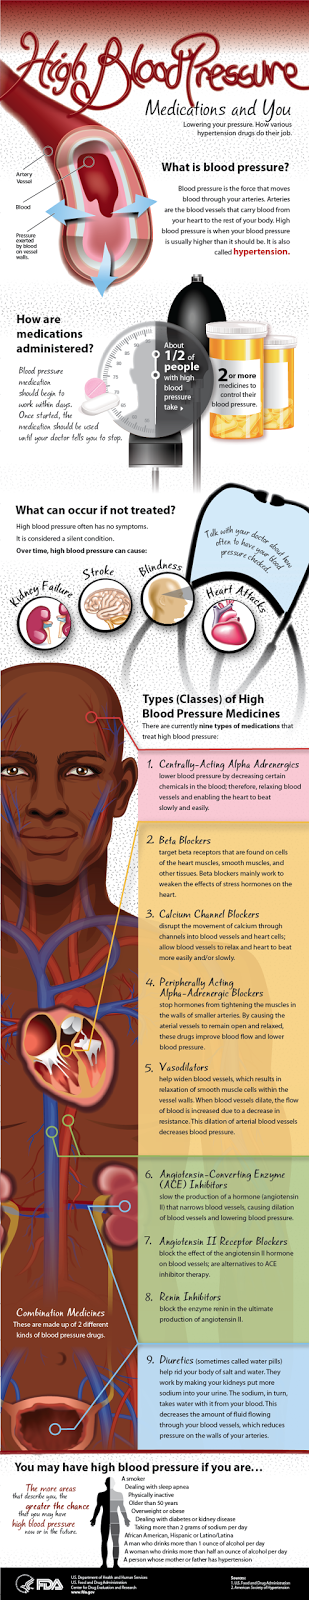 High Blood Pressure Medications and You infographic